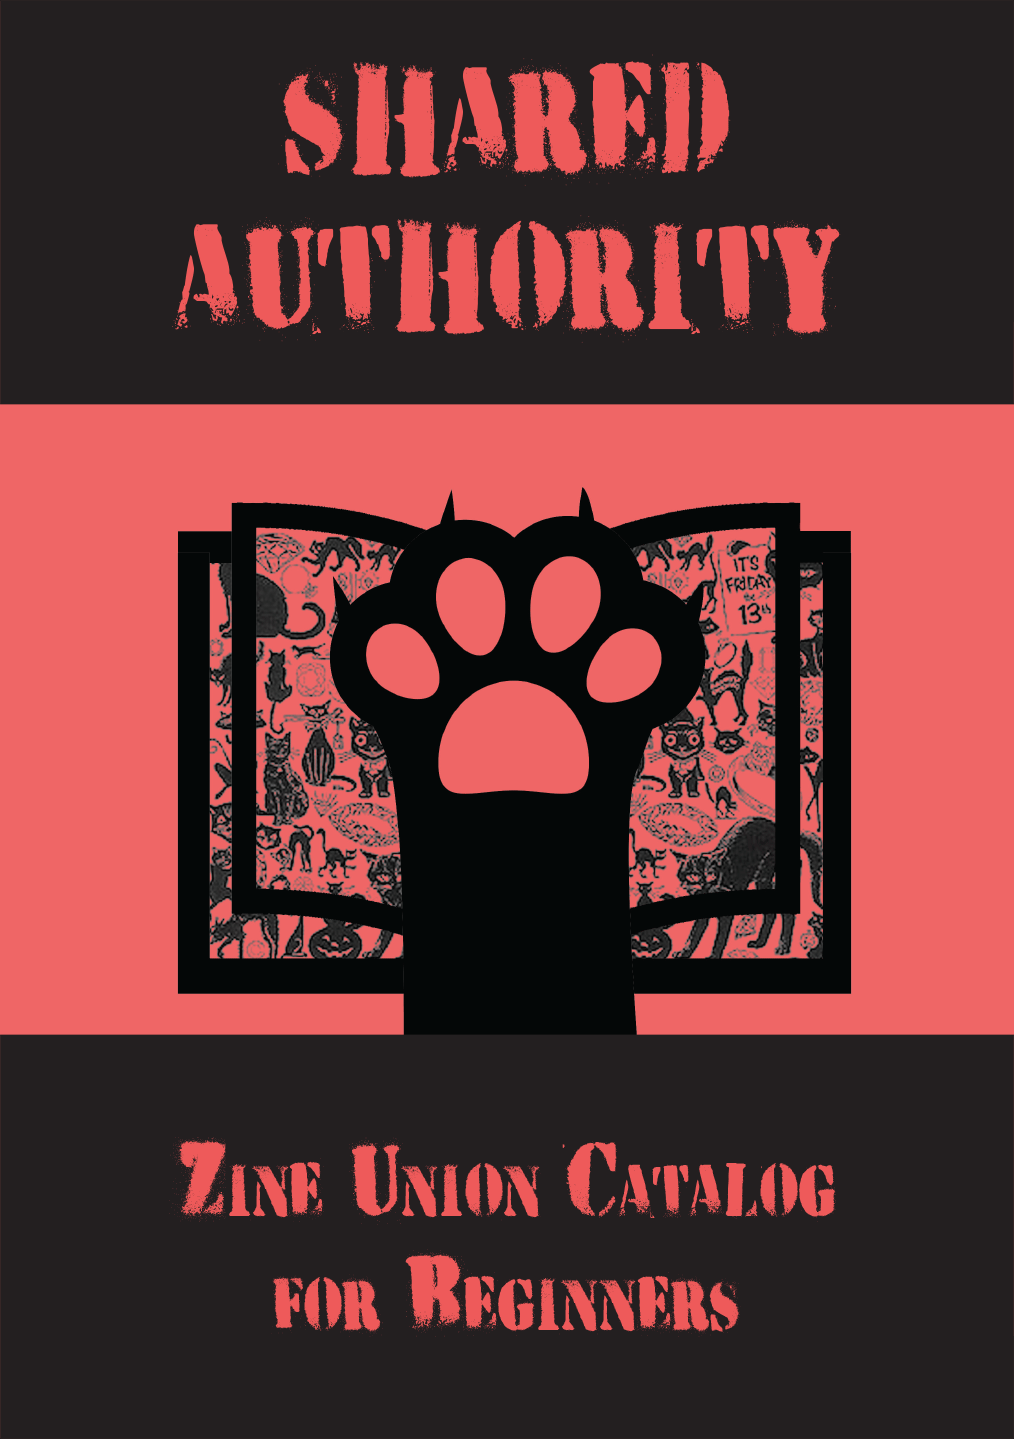 The cover page for Shared Authority featuring the red and black ZineCat paw logo.